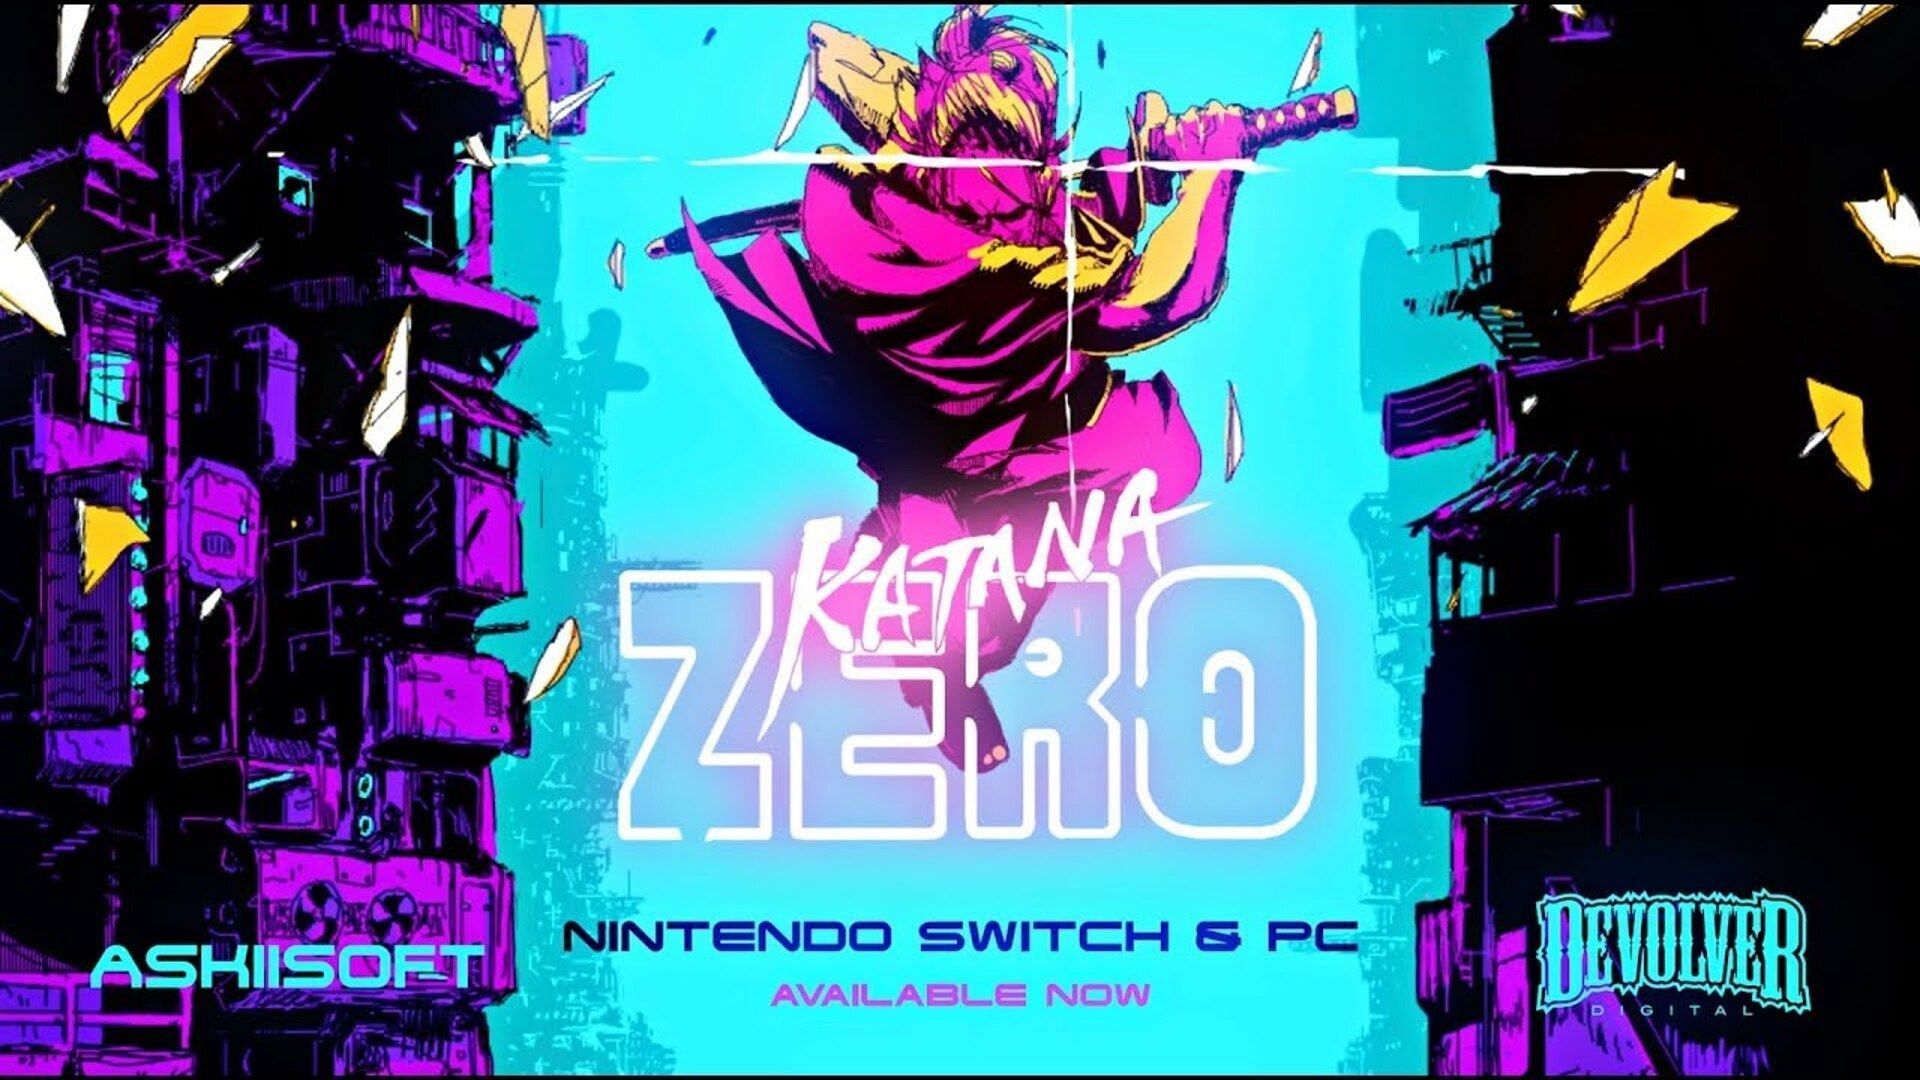 Get lost in a dystopian world with your sword in Katana Zero (Image via YouTube)